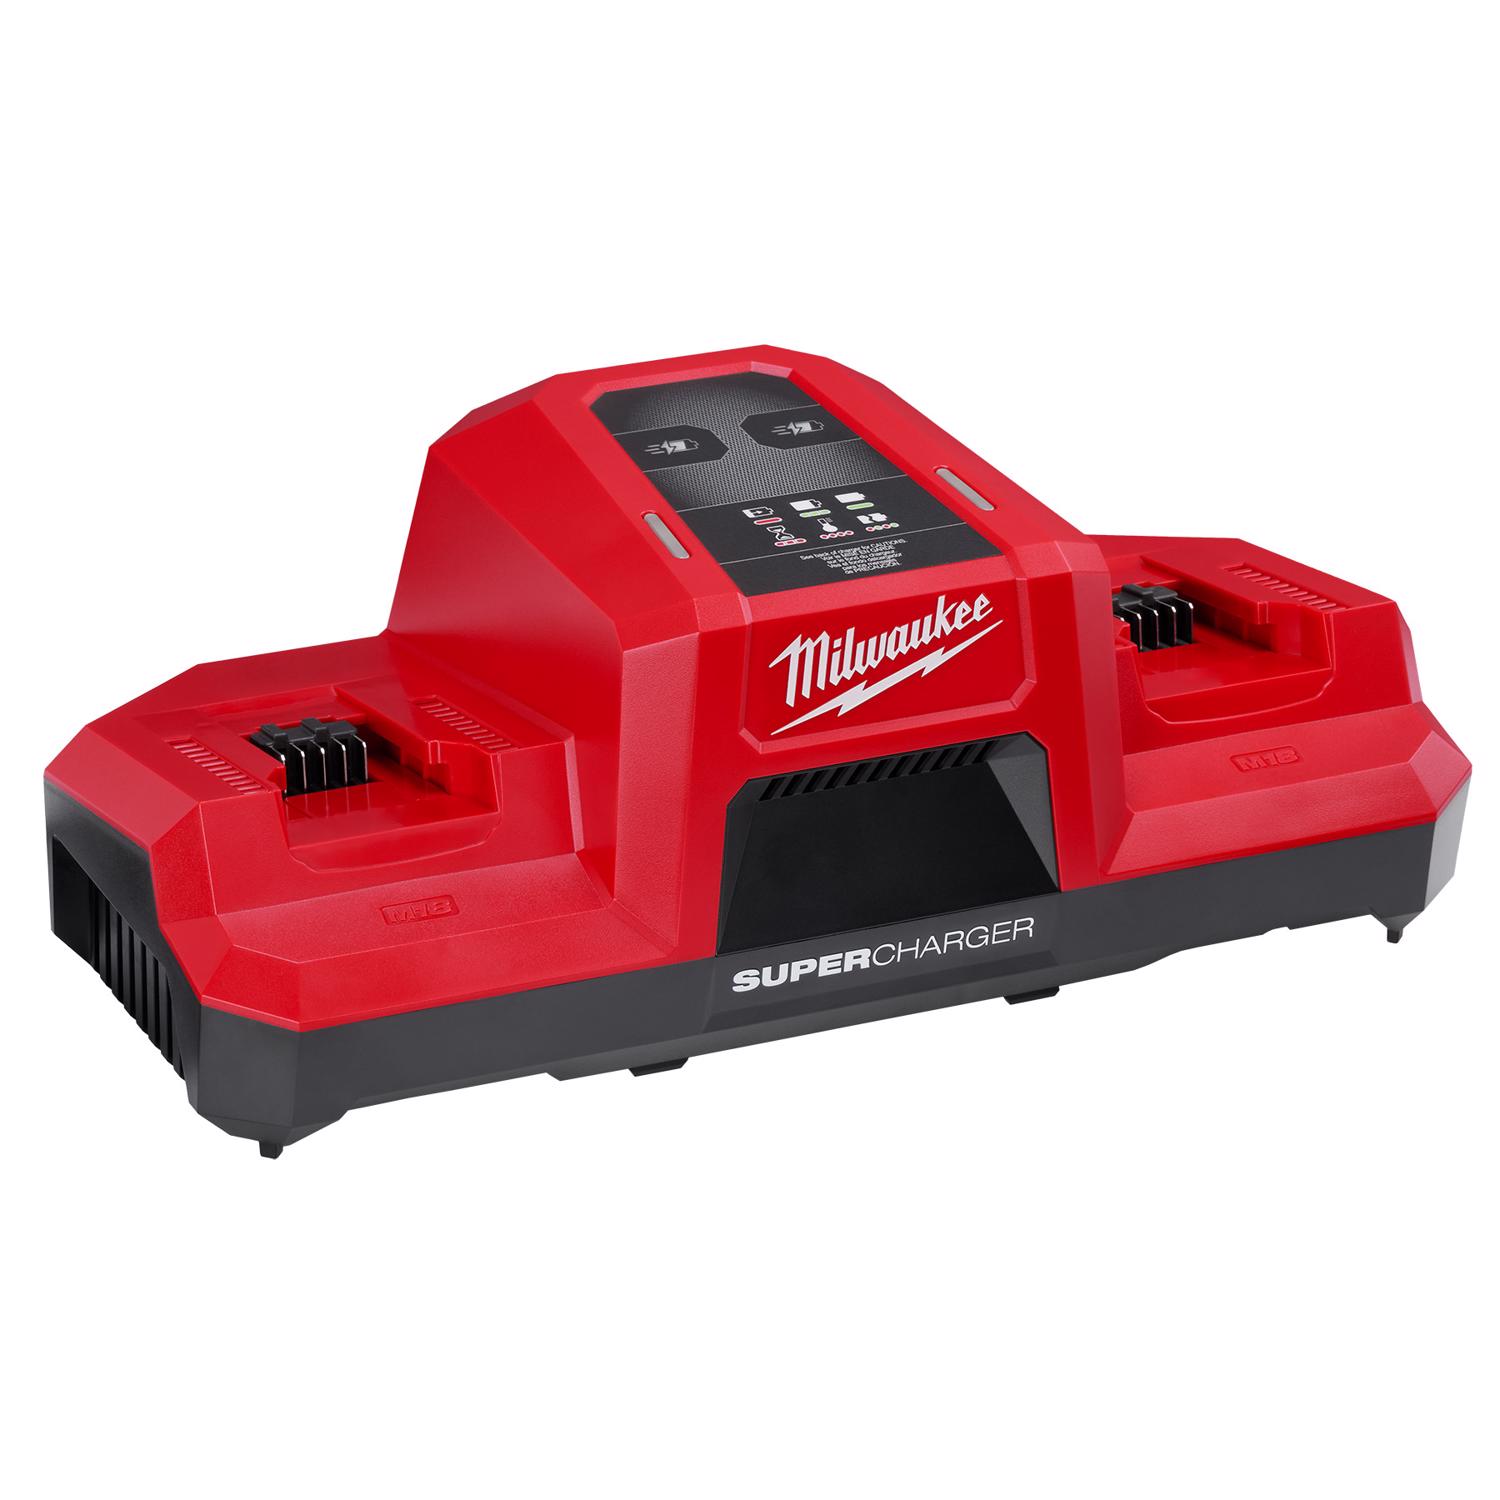 Photos - Power Tool Battery Milwaukee M18 Lithium-Ion Dual Bay Simultaneous Super Battery Charger 1 pc 